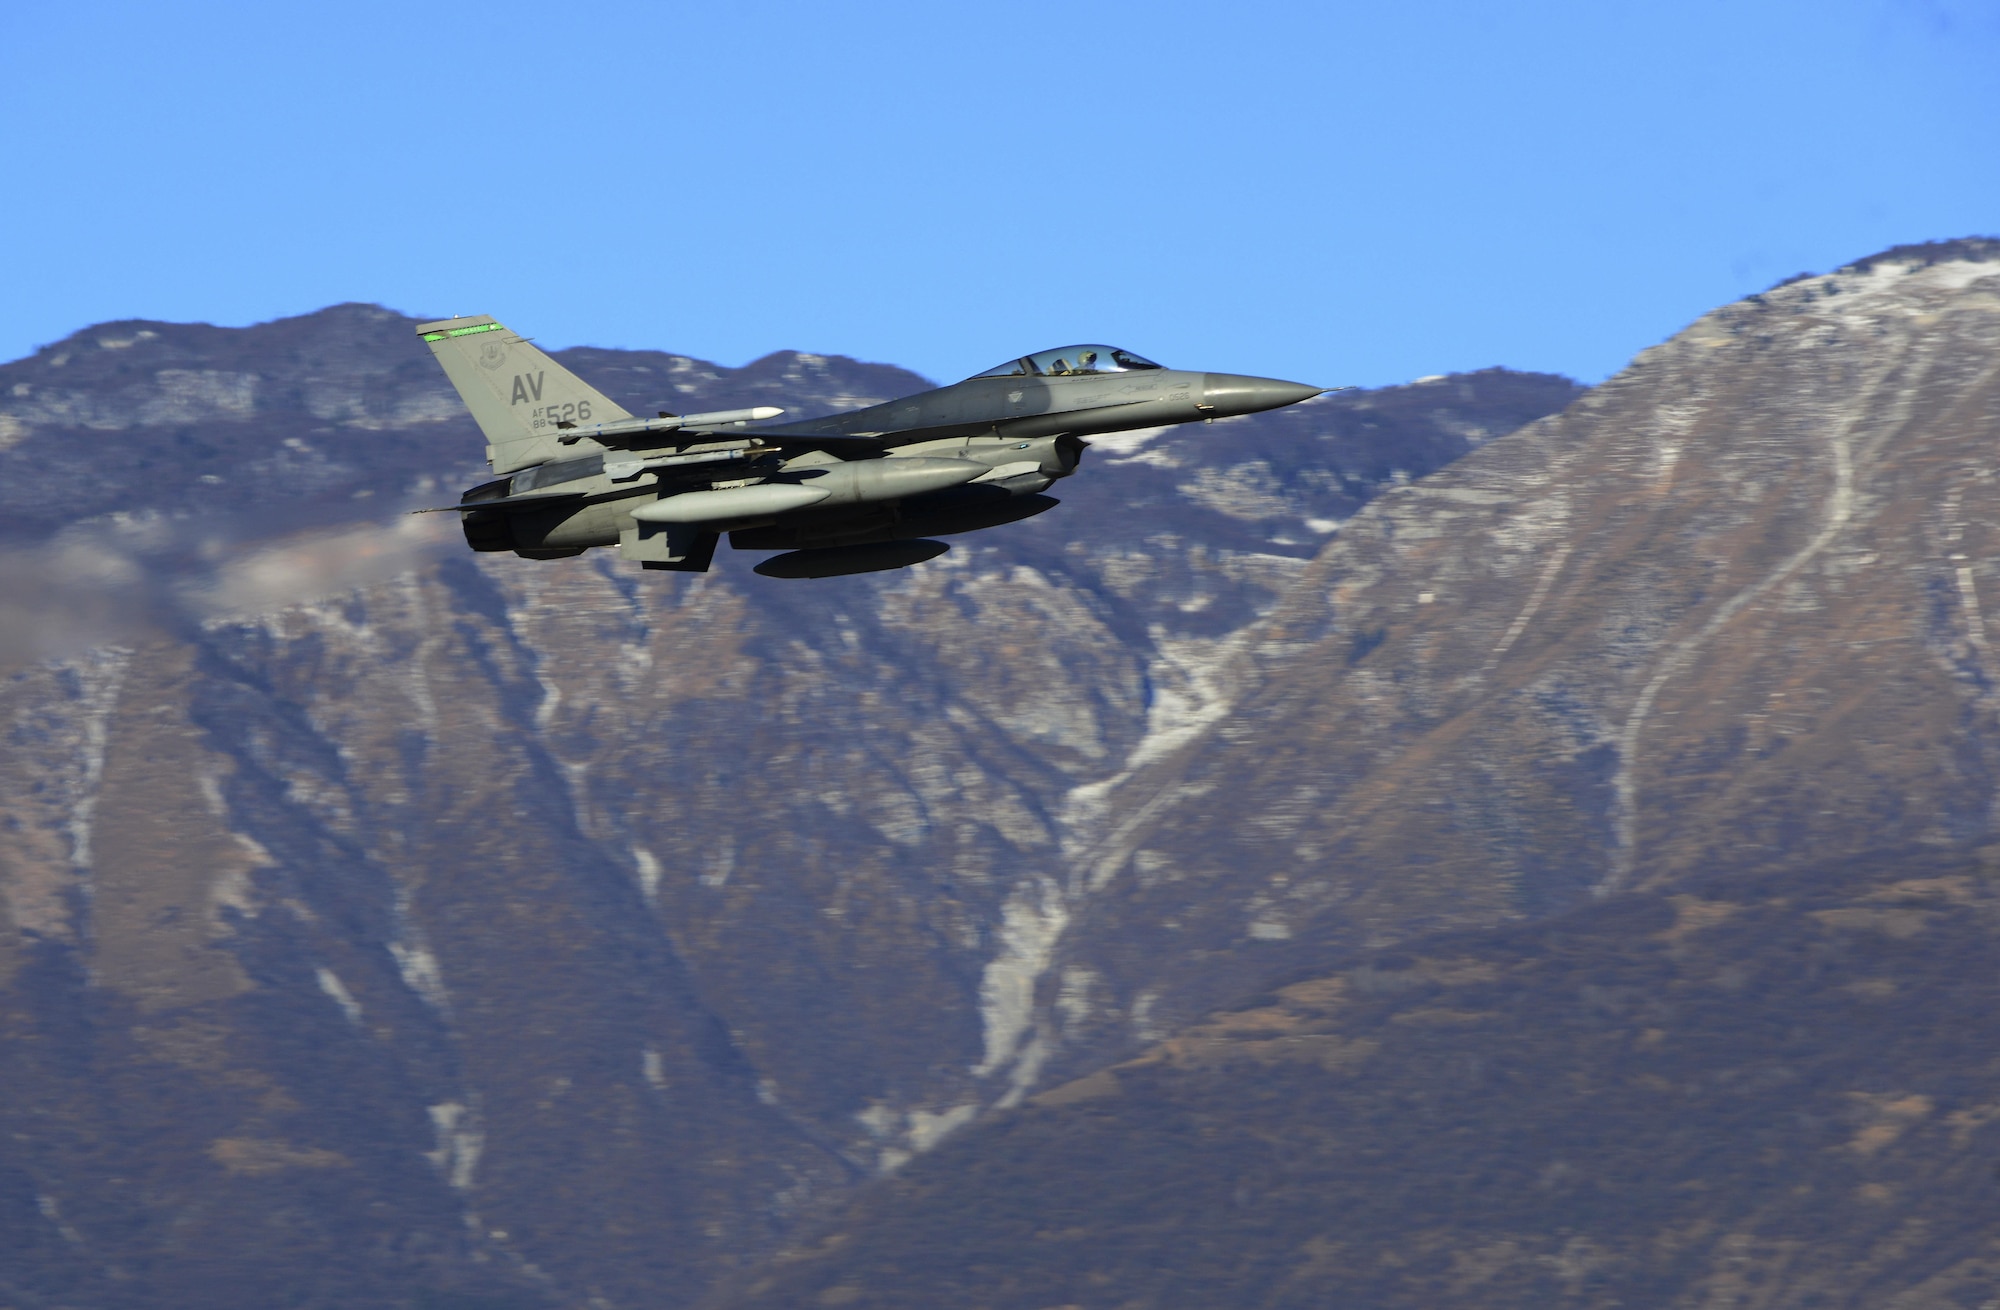 A 555th Fighter Squadron F-16 Fighting Falcon departs from Aviano Air Base, Italy on Jan. 21, 2016 to support a flying training deployment in Souda Bay, Greece. Fourteen F-16s, one KC-135 Stratotanker from the Arizona Air National Guard’s 161st Air Refueling Wing, and 280 Airmen deployed to Souda Bay to train with Greece’s Hellenic air force. (U.S. Air Force photo by Staff Sgt. Krystal Ardrey)